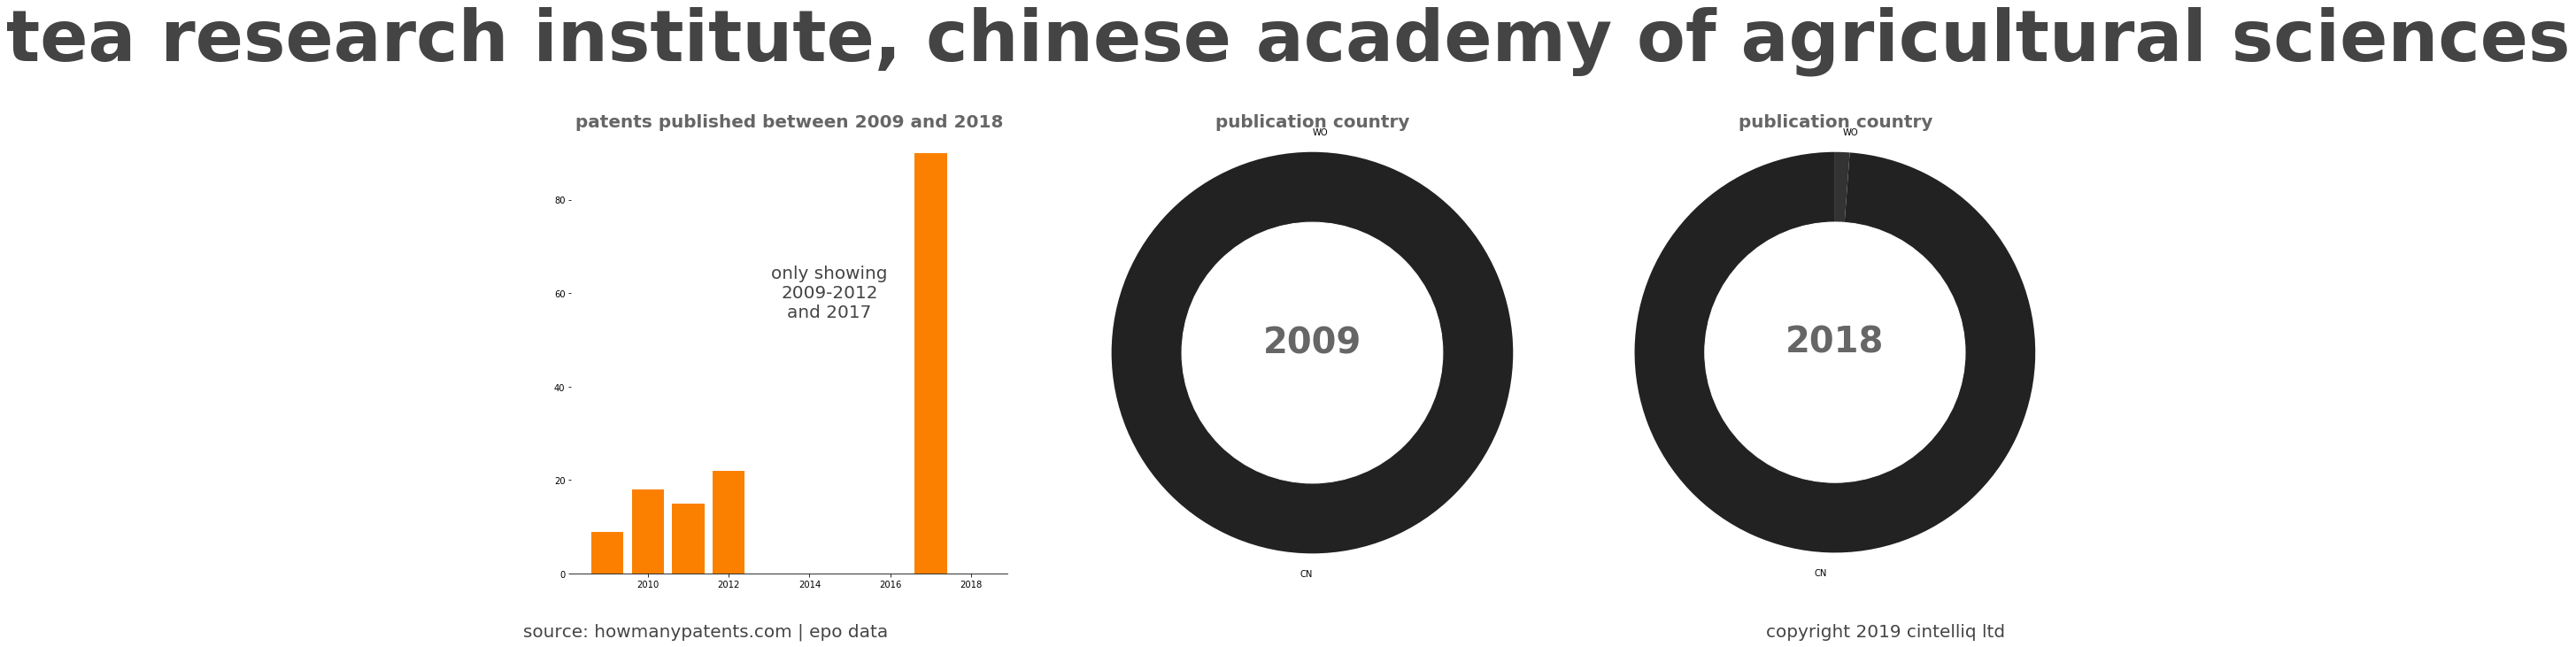 summary of patents for Tea Research Institute, Chinese Academy Of Agricultural Sciences